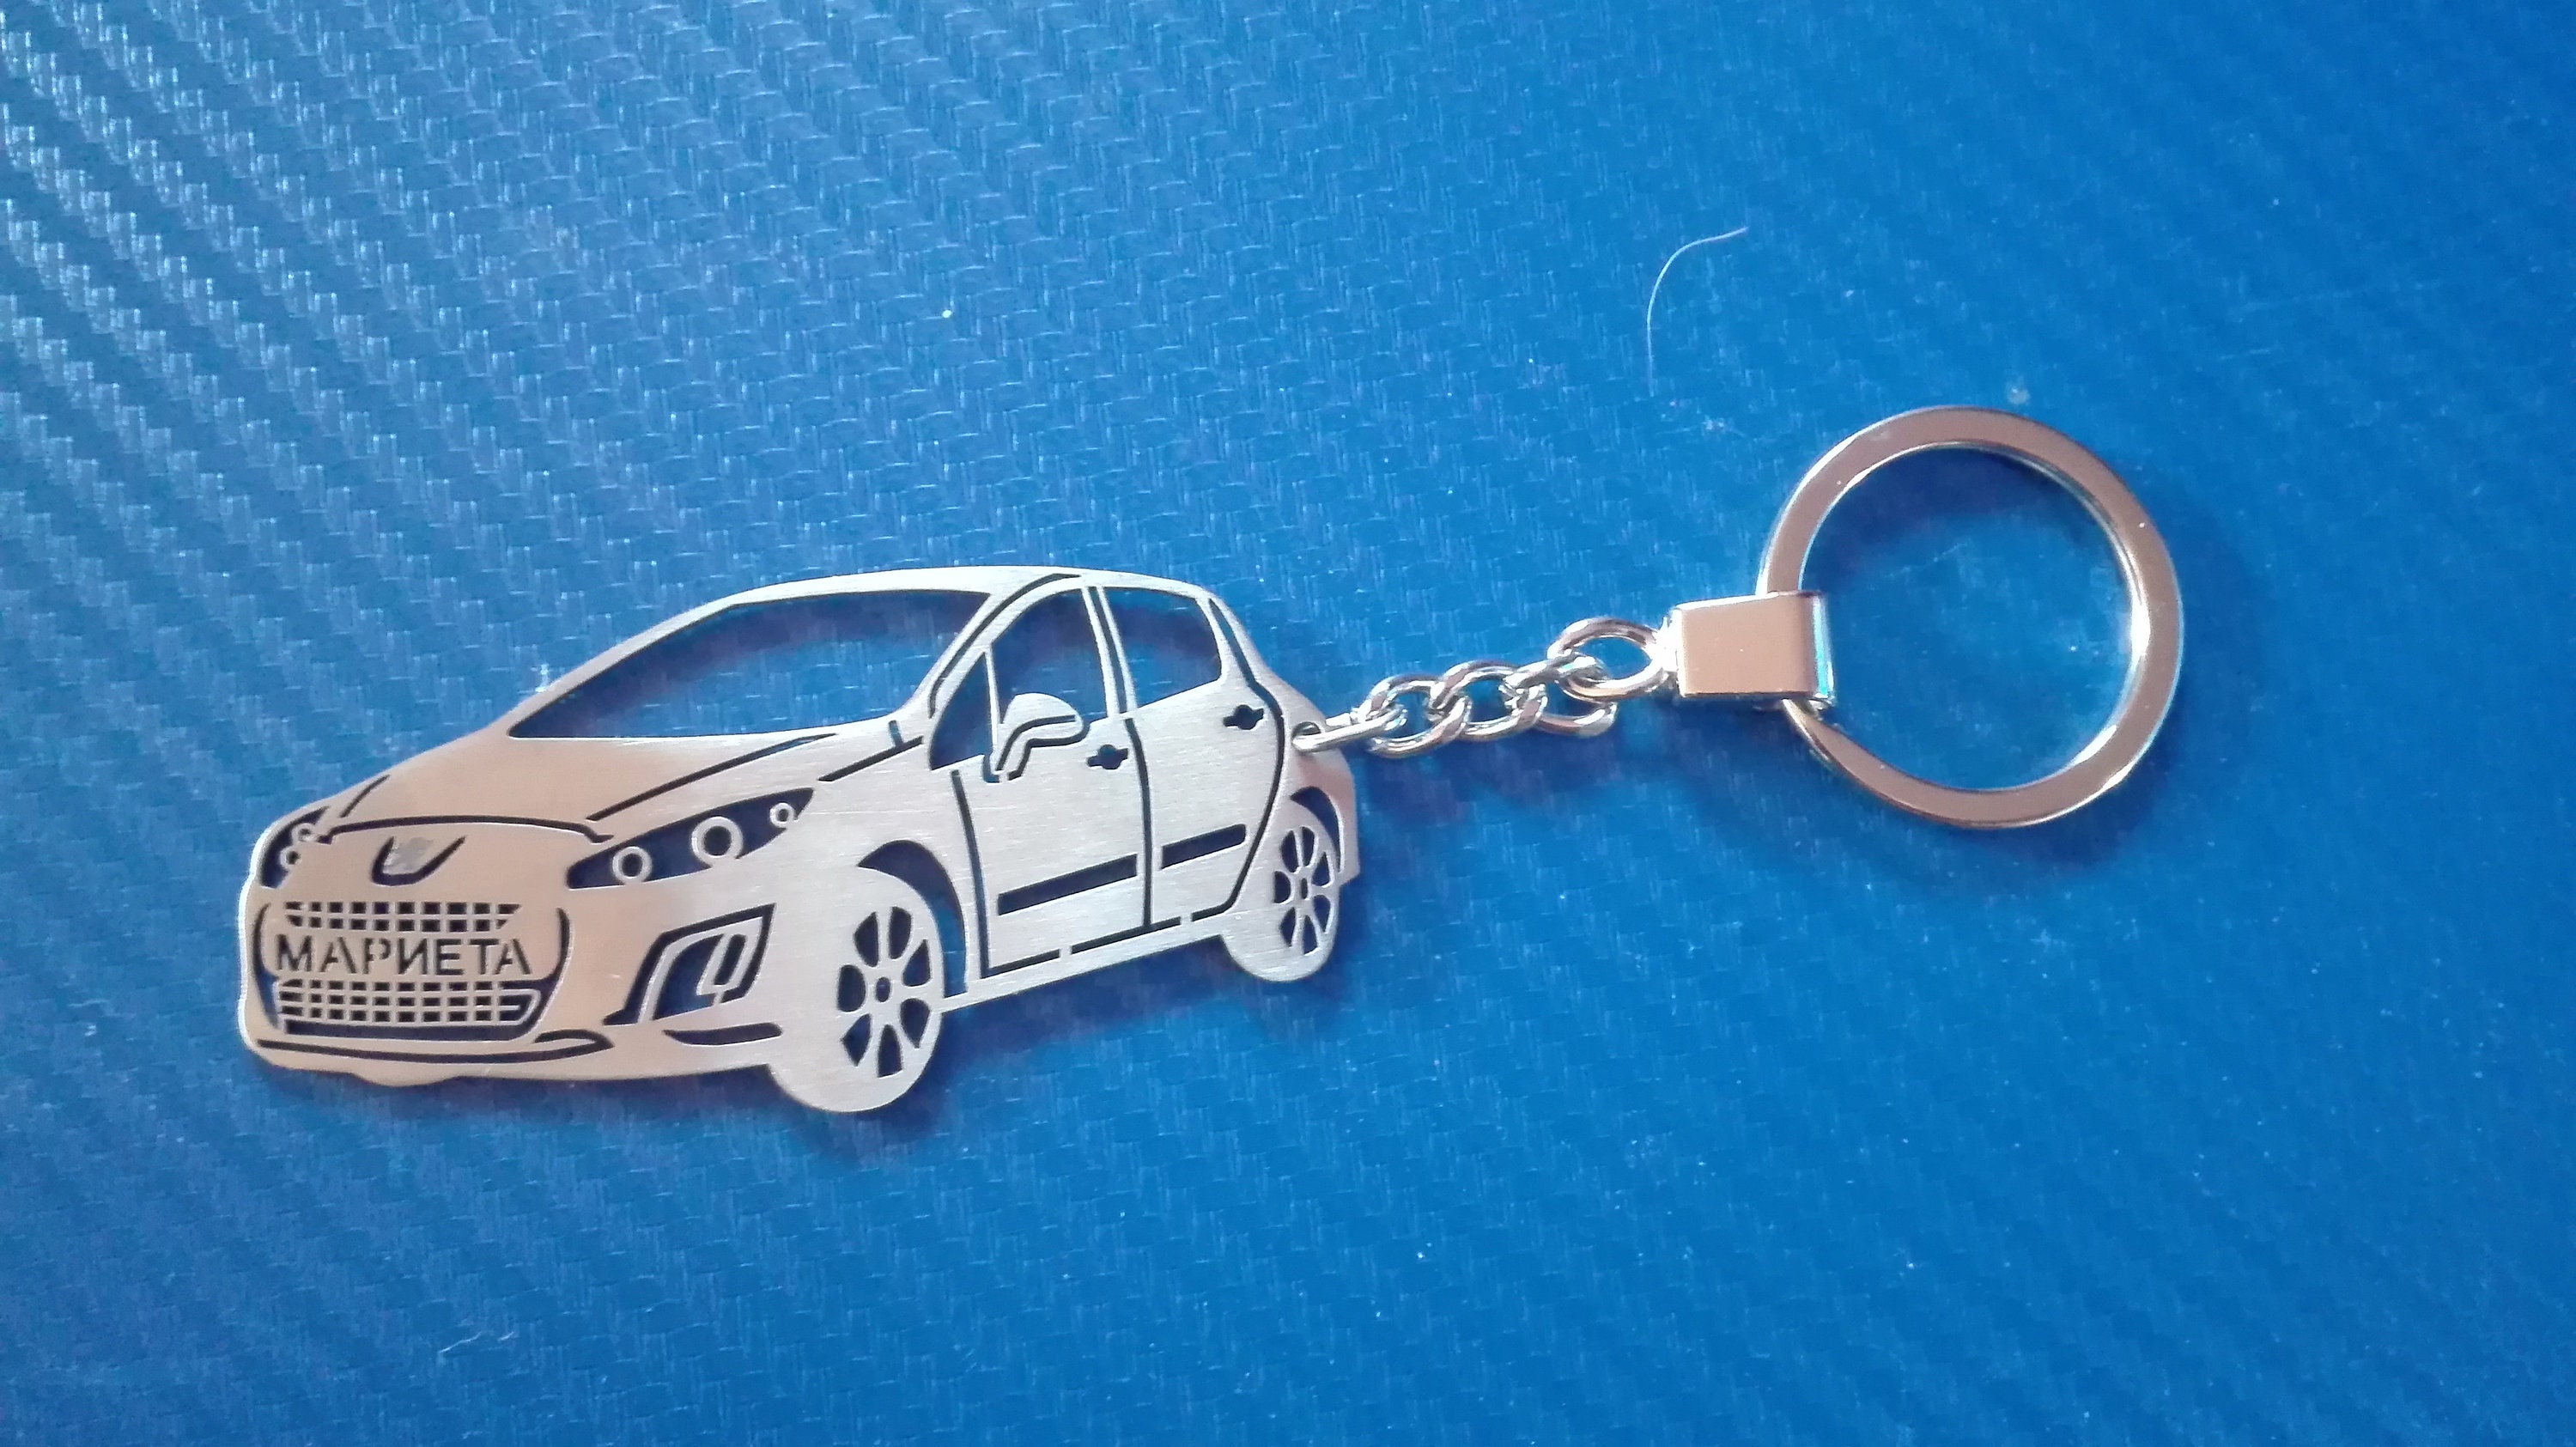 Car Keychain Logo Keyring Accessories For Peugeot 206 207 208 301 307 308  T9 406 407